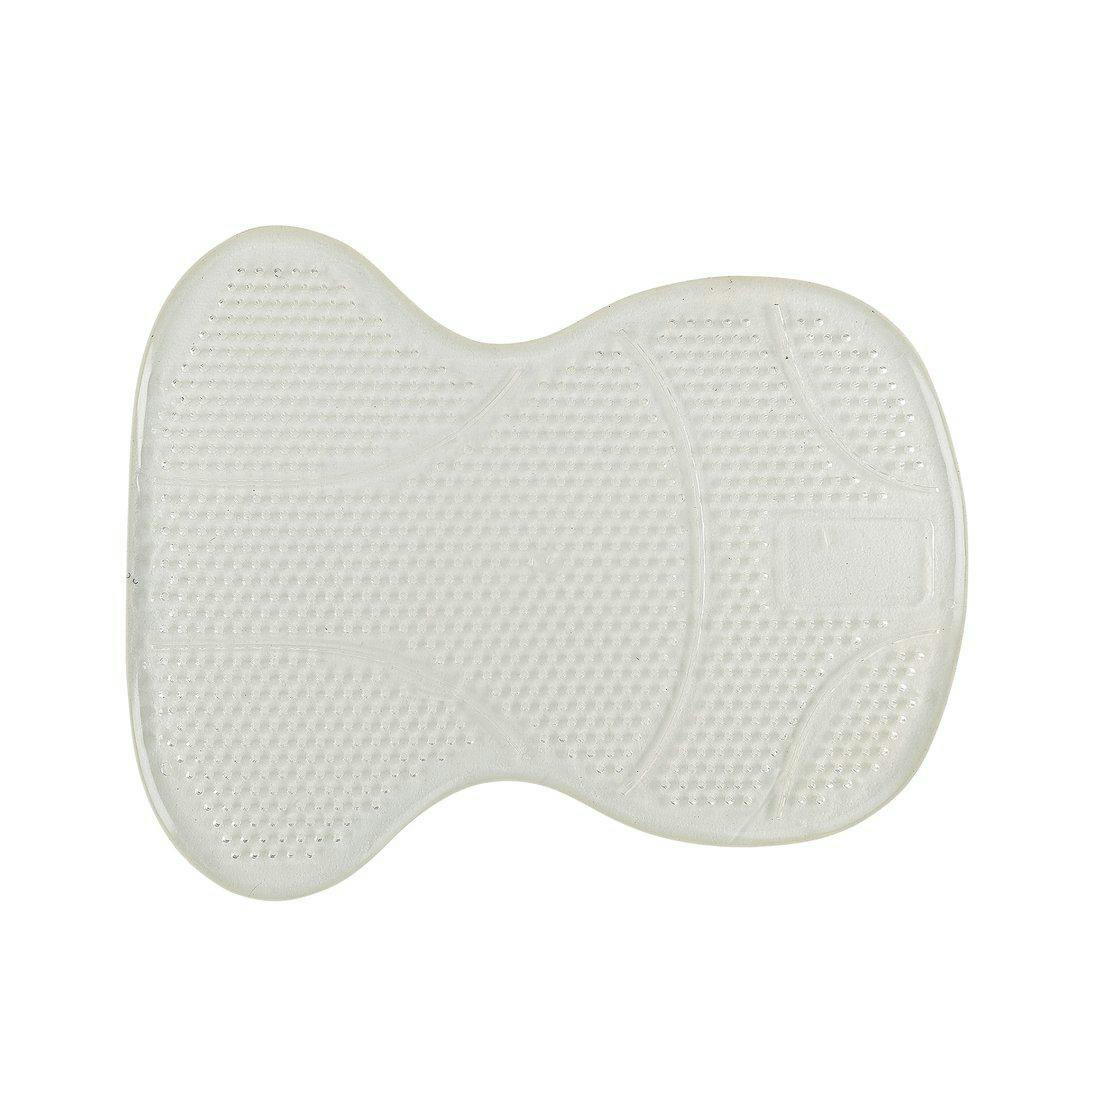 Gelpad, one size, Protector